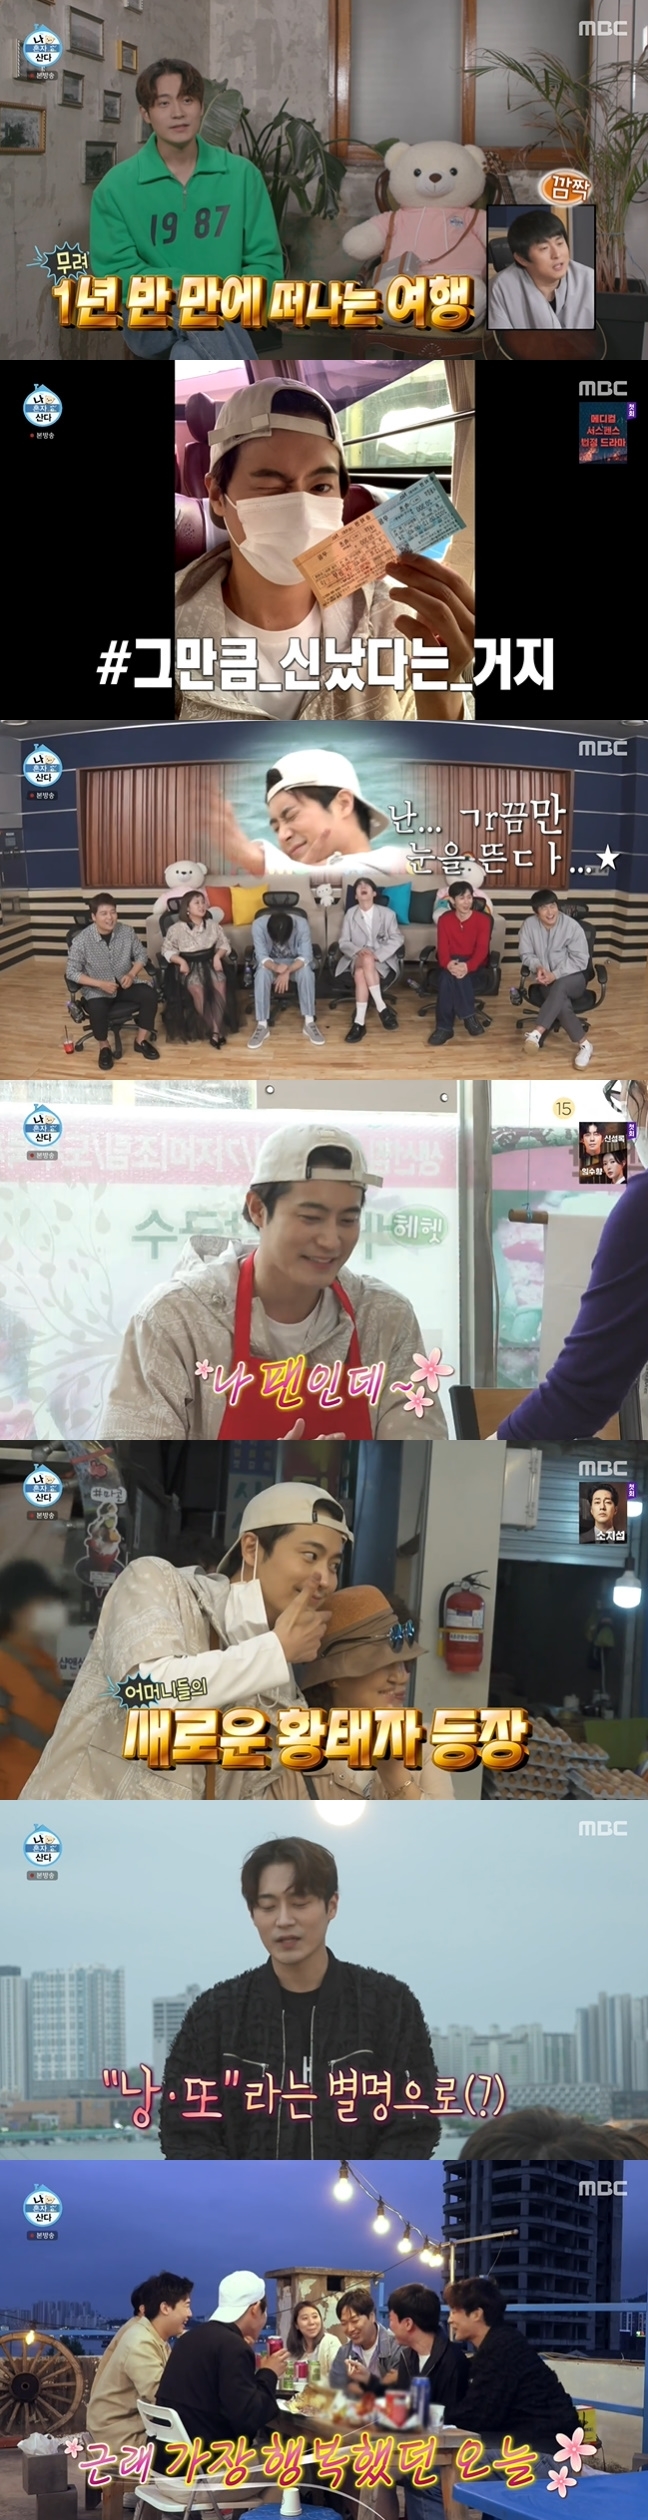 Pak Se-ri certified big hand in home camping with PetOn MBC I Live Alone broadcast on May 20, Pak Se-ri enjoyed his leisure at the Festival.Pak Se-ri visited the festival, which boasts a Hollywood scale, to see Pet even during a busy schedule.When Jun Hyun-moo, who watched the breakfast of Pak Se-ri with a hamburger on TV, said, Thats not a big deal, but its delicious, Pak Se-ri said, Why?It is delicious, but it is not much, he said, drawing a line to his fellow Jun Hyun-moo and laughing.Jun Hyun-moo was surprised at the size of the house of Pak Se-ri, saying, I can not say home camping, and Park Na-rae also said, This is the camping field.You can get 3 to 50,000 One per deck. Pak Se-ri, who went to buy food ingredients for Camping, was worried about how much Alone would have to buy.However, Pak Se-ri bought 210,000 One worth of Alone with meat in a butcher shop, and also bought squid, horny, and scallops in the fish market.Pak Se-ri, who brought food indrendants full of hands, said that Alone wrote 400,000 One for Camping, Every single Alone is similar in price.Its strange, Alone, but it doesnt always change the price, and it just happened.When Madang was unveiled in front of the house of Pak Se-ri, Jun Hyun-moo was surprised that this is home? It is the real United States of America.Gian 84 also envied, Its a house everyone dreams of. Pak Se-ri re-entered the pineapple cultivation that failed while Pets were running in Madang.Surprised by everyone with a basket of pineapple filled with carts, the Pak Se-ri was laughing with an extraordinary size mini vinyl house.Pak Se-ri set fire to two fires and prepared for Camping; Pak Se-ri, who ate the squid sashimi while the fire was burning, baked lamb ribs for Pet.Pak Se-ri said, I will bake lamb for the first time for you. After distributing meat to Pet in the order of age, he continued to take the meat with his mouth, saying, This is my mothers.Park Na-rae envied, If you bake it so well, I want to contribute on your feet.Pak Se-ri, who inhaled the meat by storm, took out a box of sweet potatoes and put them in a sweet potato container.Surprised by the sales sweet potato tin that appeared at home, Kee asked, Do not you have to connect this gas? And Pak Se-ri surprised everyone by revealing gas facilities.Pak Se-ri handed out sweet potatoes to Pet and took pictures together and left memories.Tea in the garden left Travel in a year and a half with Corona 19 and drama shooting.Tea in the garden, who cut off the bus ticket directly from the terminal and headed for Sokcho, took a certification shot with a wink as soon as he took the bus, plugged in his earphones and got emotional.After arriving at Sokcho, Tea in the garden put the sea scenery on a disposable film camera and wrote the nickname Nanto on the sand.Tea in the garden, who took the hostel as a guest house, said, I think it is the beauty of Travel, but when I talk to strangers, it seems to come a moment when I become more honest.I go to Korea a lot and go to guest houses in foreign countries.Tea in the garden, who unpacked the accommodation, visited the Sokcho market to buy food to take to the PoMitsubishi Fuso Truck and Bus Corporation party.In addition to the Sokcho restaurant, housewives who recognized Tea in the garden were crowded in the market, and fans asked for a photo in line, praising too good man and real thing is better.I was a little proud of myself today, and I appreciate the director of the Second Husband for the fact that my mothers have noticed so much.I want to convey this honor to many people. When she returned from chapter, Tea in the garden had a Formisubishi Fuso Truck and Bus Corporation party with guests at the guest house she had first seen.In an awkward atmosphere, Tea in the garden introduced herself and after interviewing, she had a comfortable drink with the first person she met, from the woman who had been struggling to travel to the woman who had been dating for three years to the man who had separated from her girlfriend.Tea in the garden presented the medicines from the market and said, It seems that I have come to the sea for a long time with my friends.I thought it was not a place of harmony between youth and romance. 